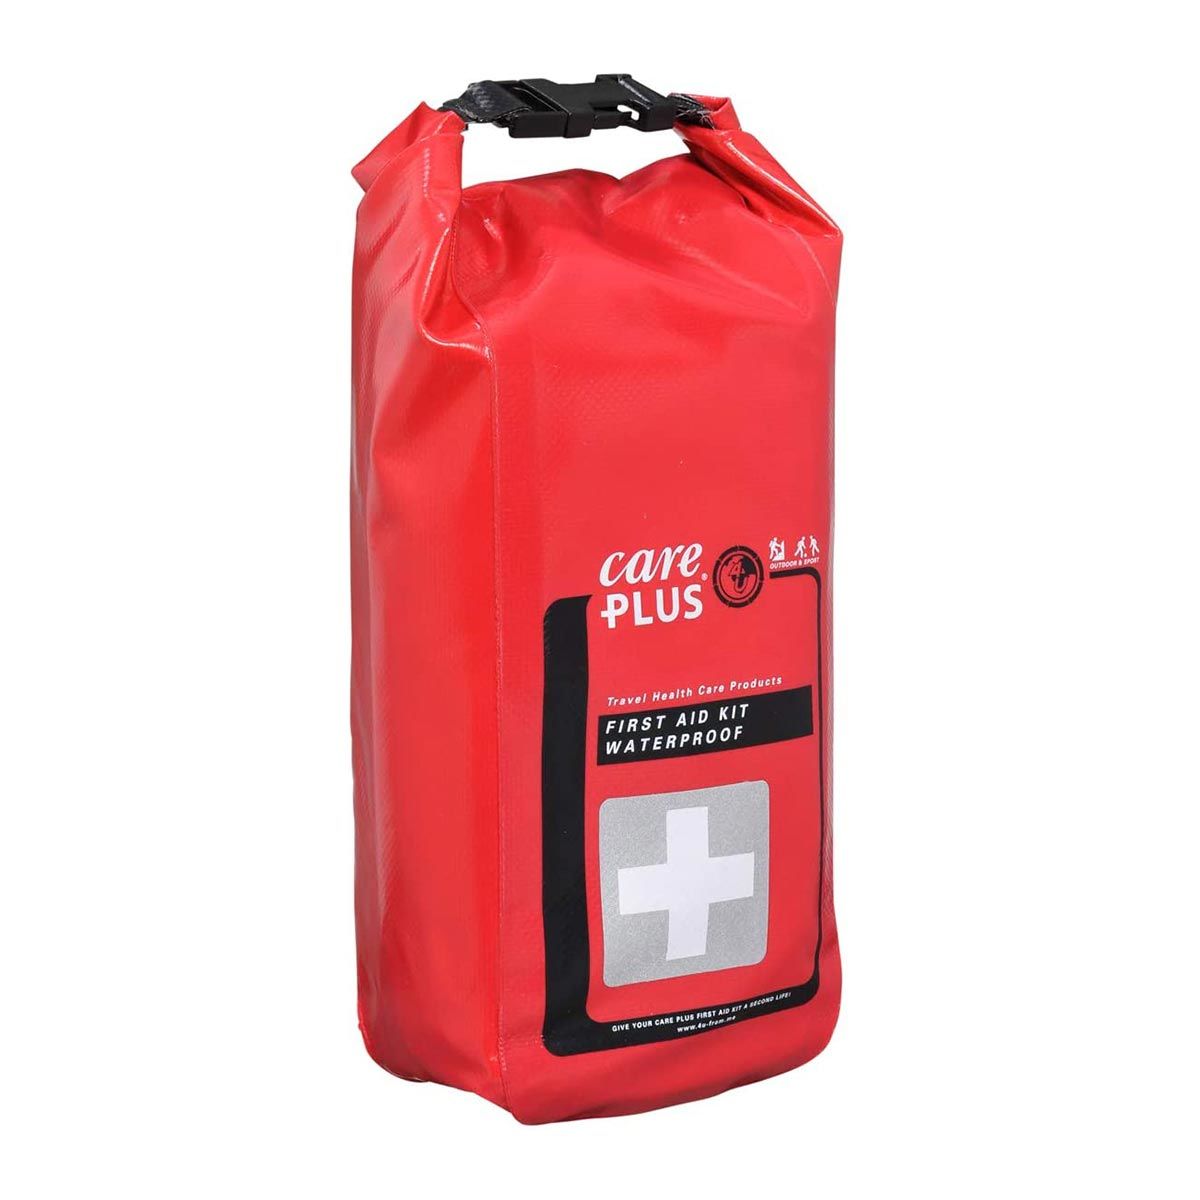 Care Plus first aid kit - Waterproof